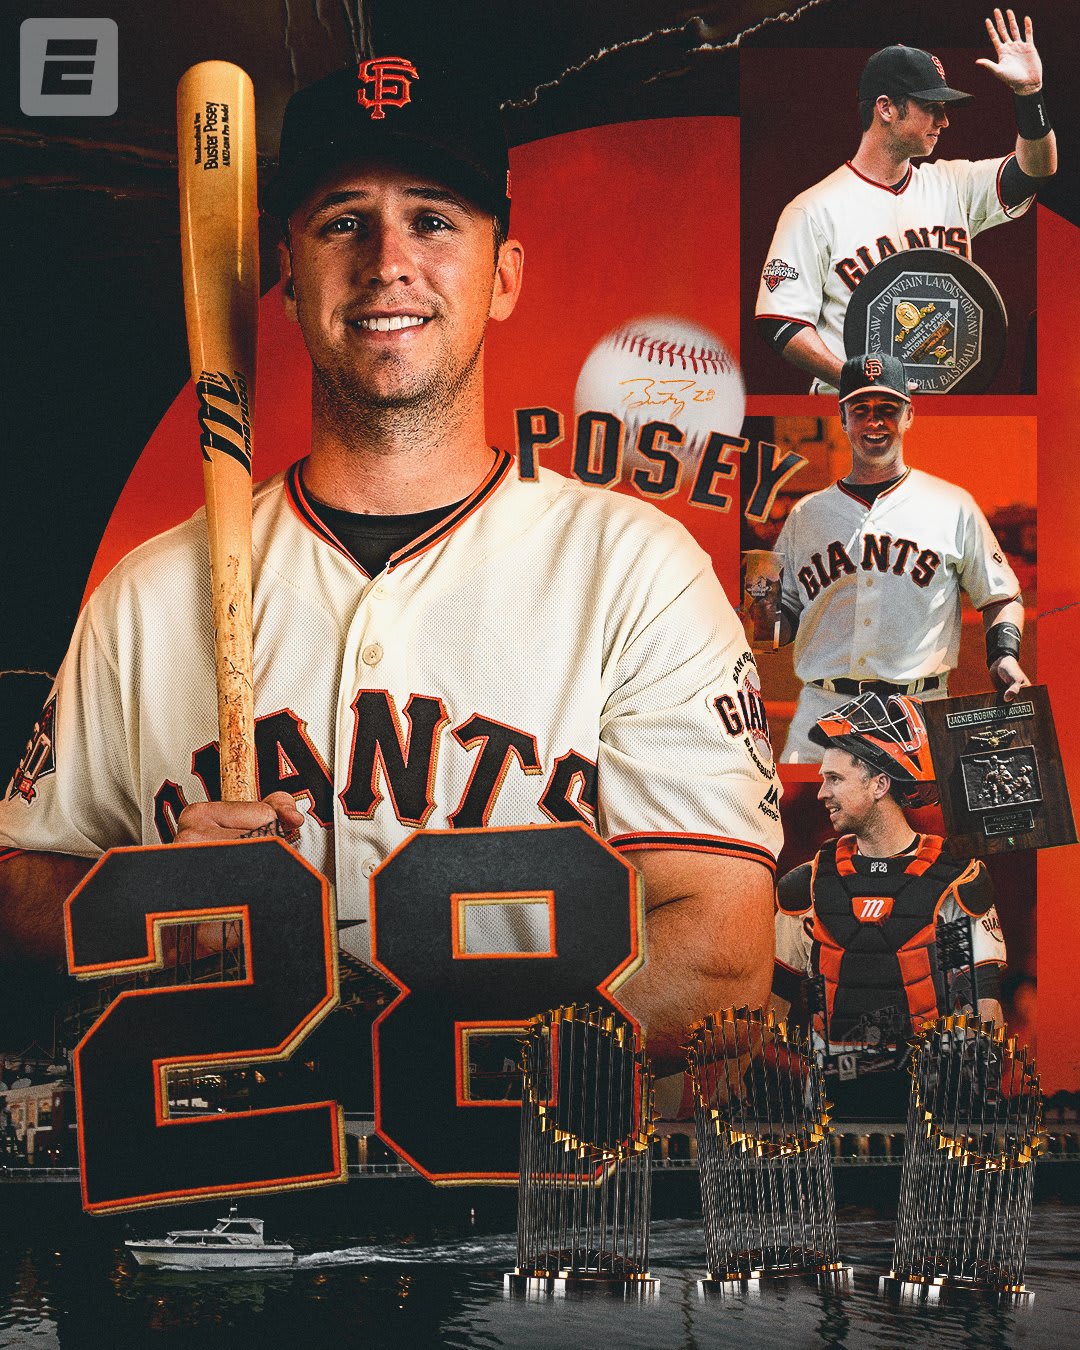 The face of the Giants for the past decade is calling it a career. Buster Posey has officially announced his retirement from the game of baseball